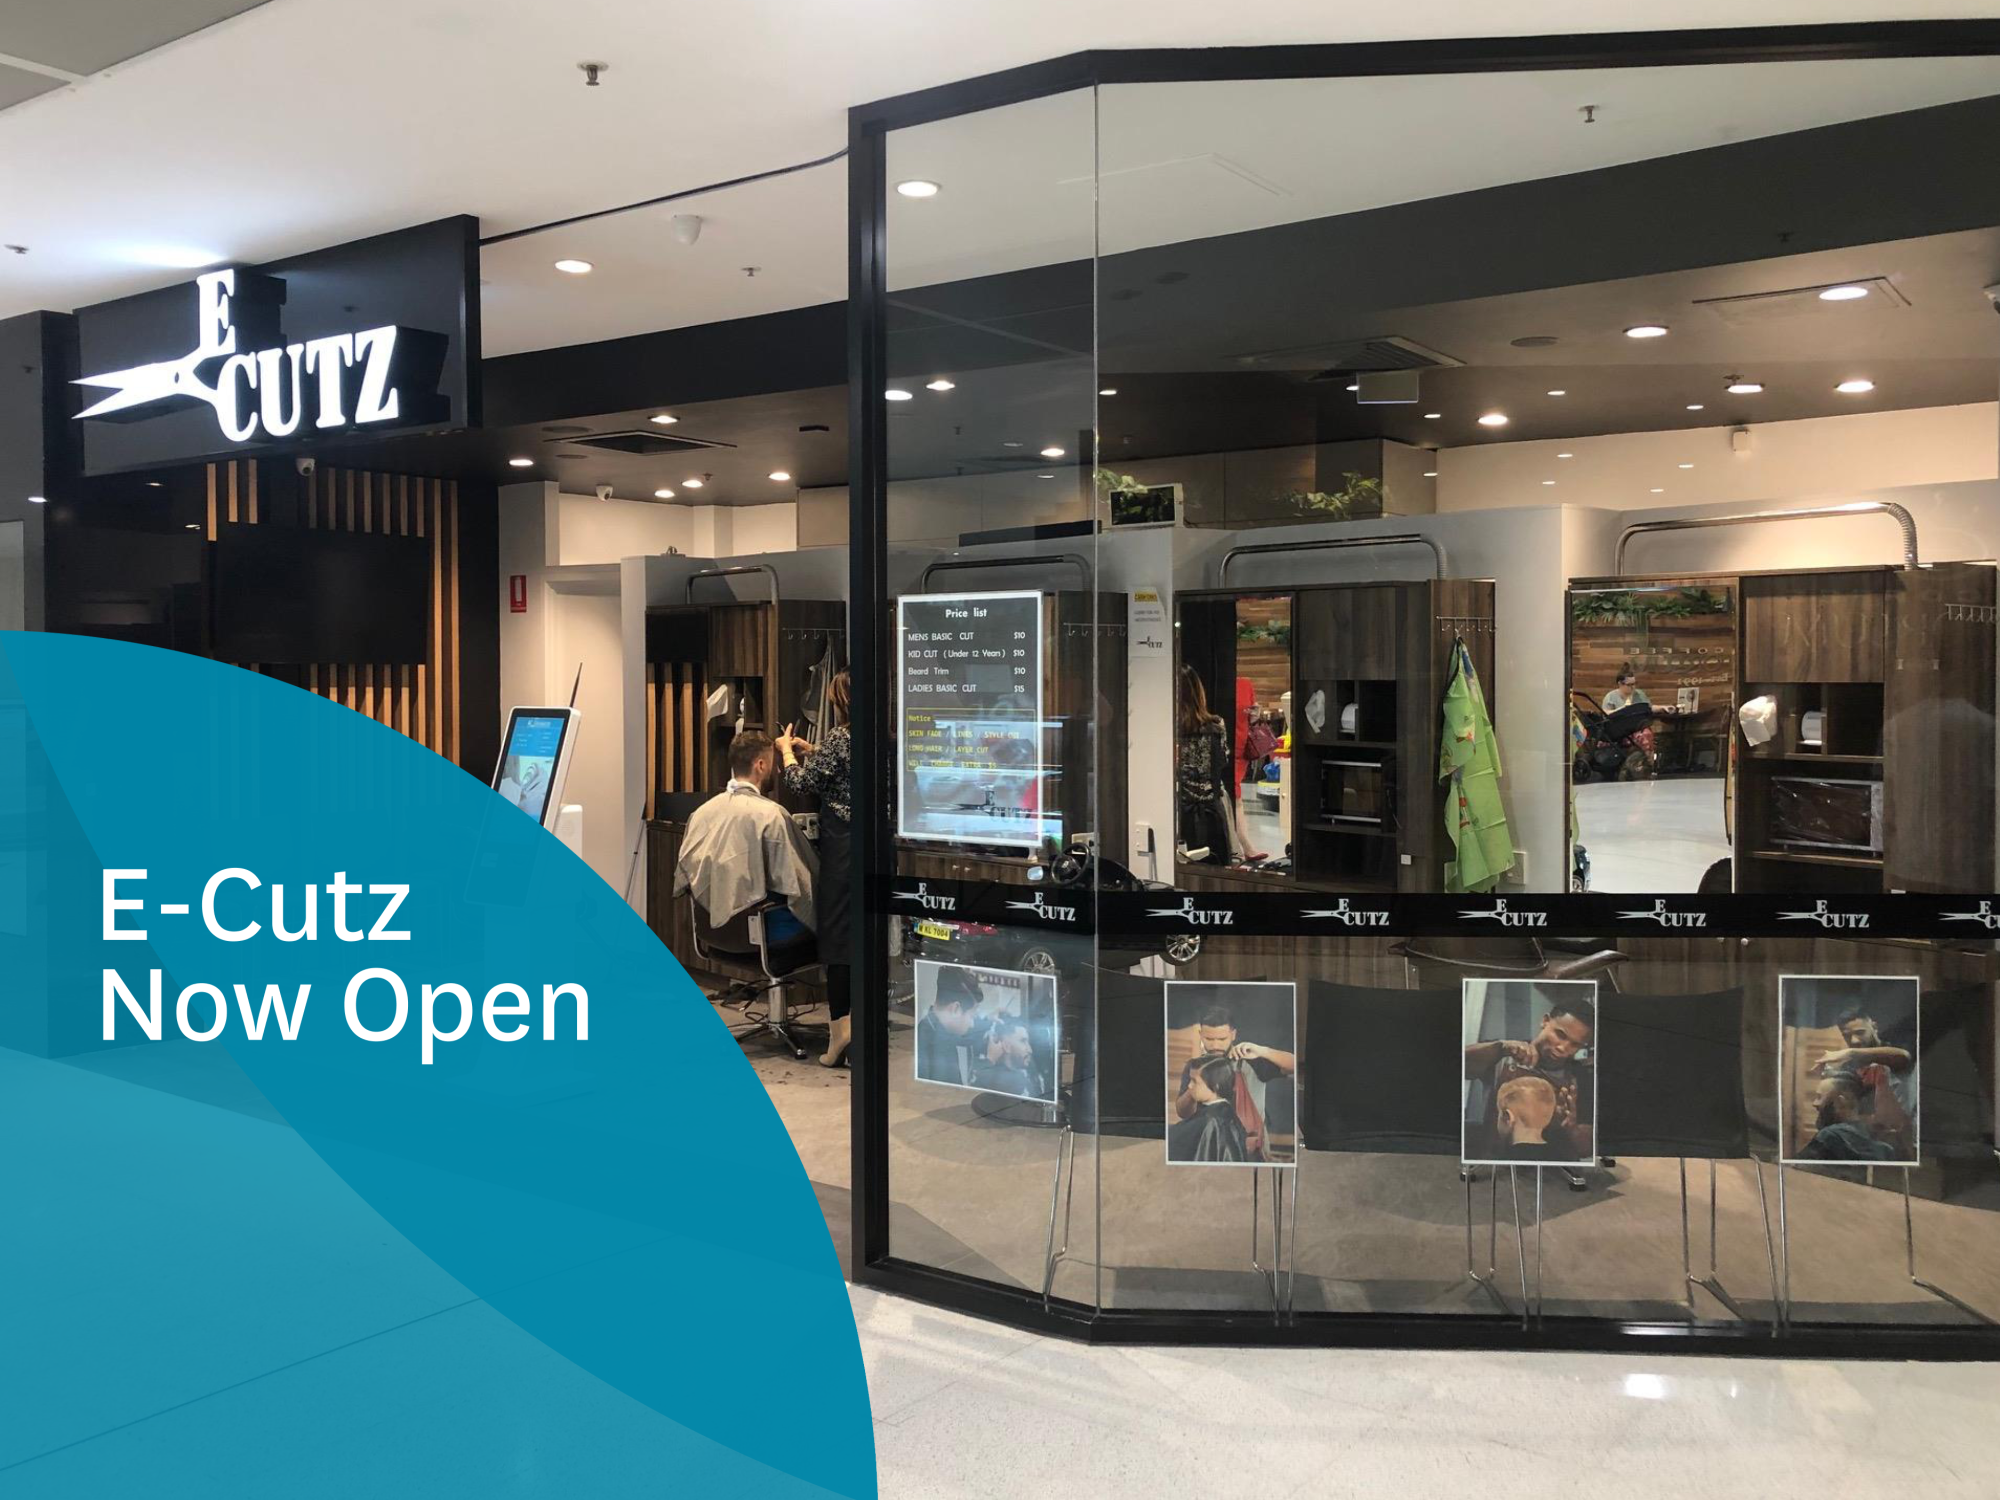 News At Stockland Townsville Shopping Centre Ecutz Now Open